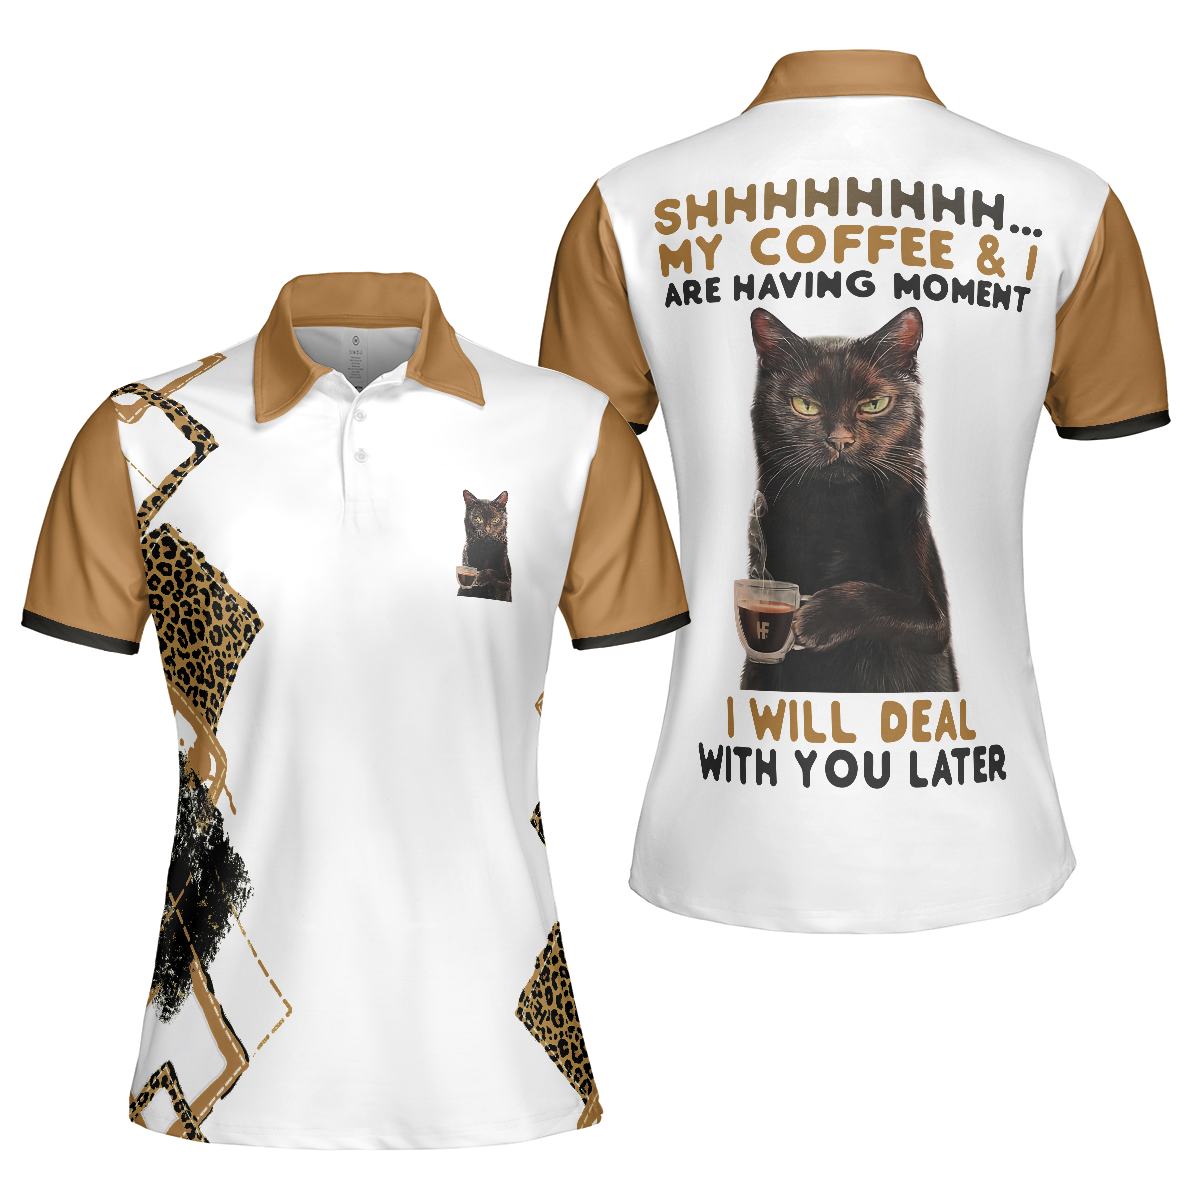 Black Cat Women Polo Shirt, Shh My Coffee And I Are Having A Moment Women Polo Shirt, Leopard Shirt - Perfect Gift For Ladies, Women, Cat Lovers